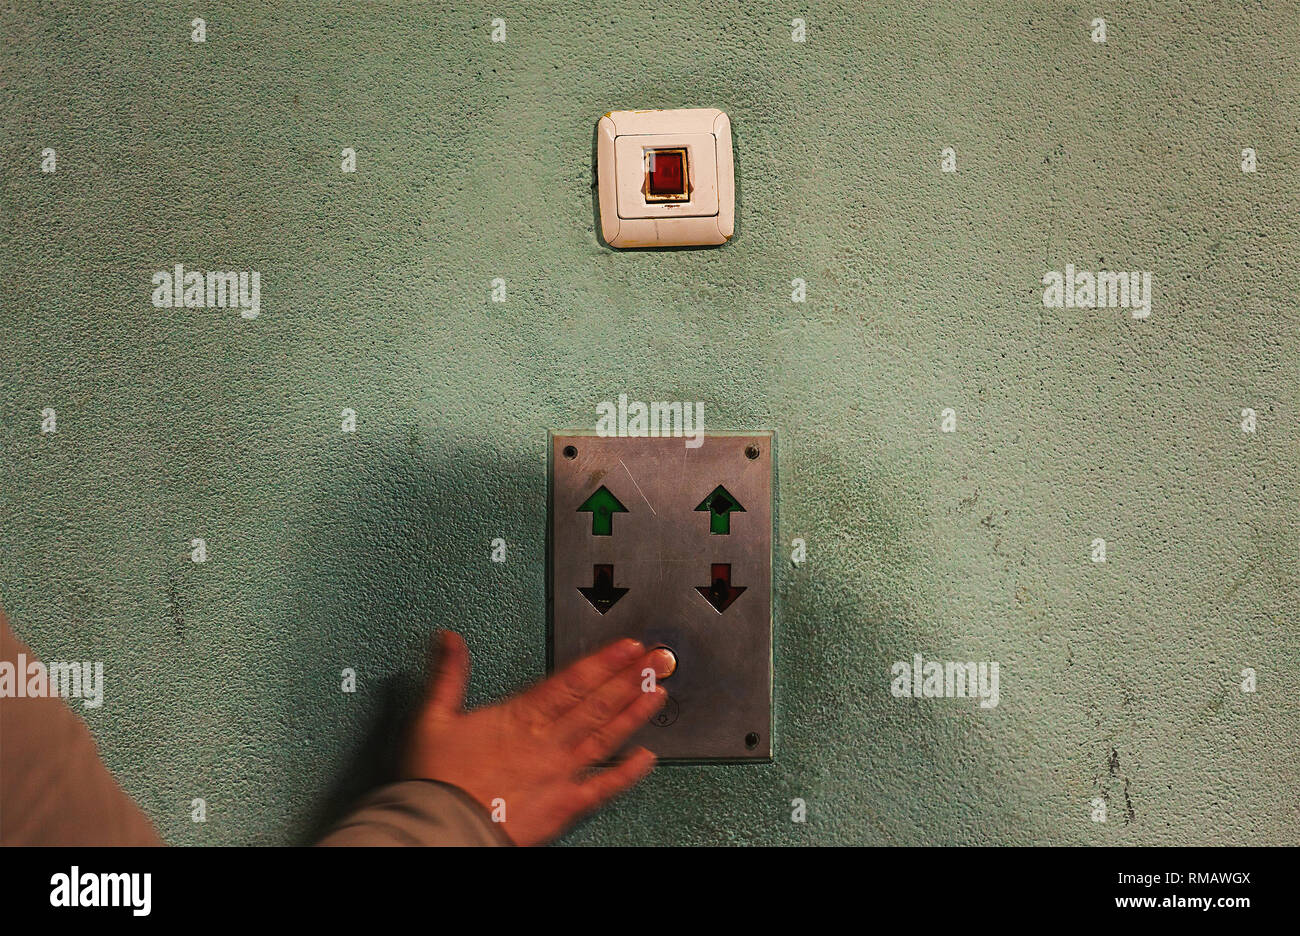 Pushing an old elevator button, details of an old retro technology and wall. Stock Photo